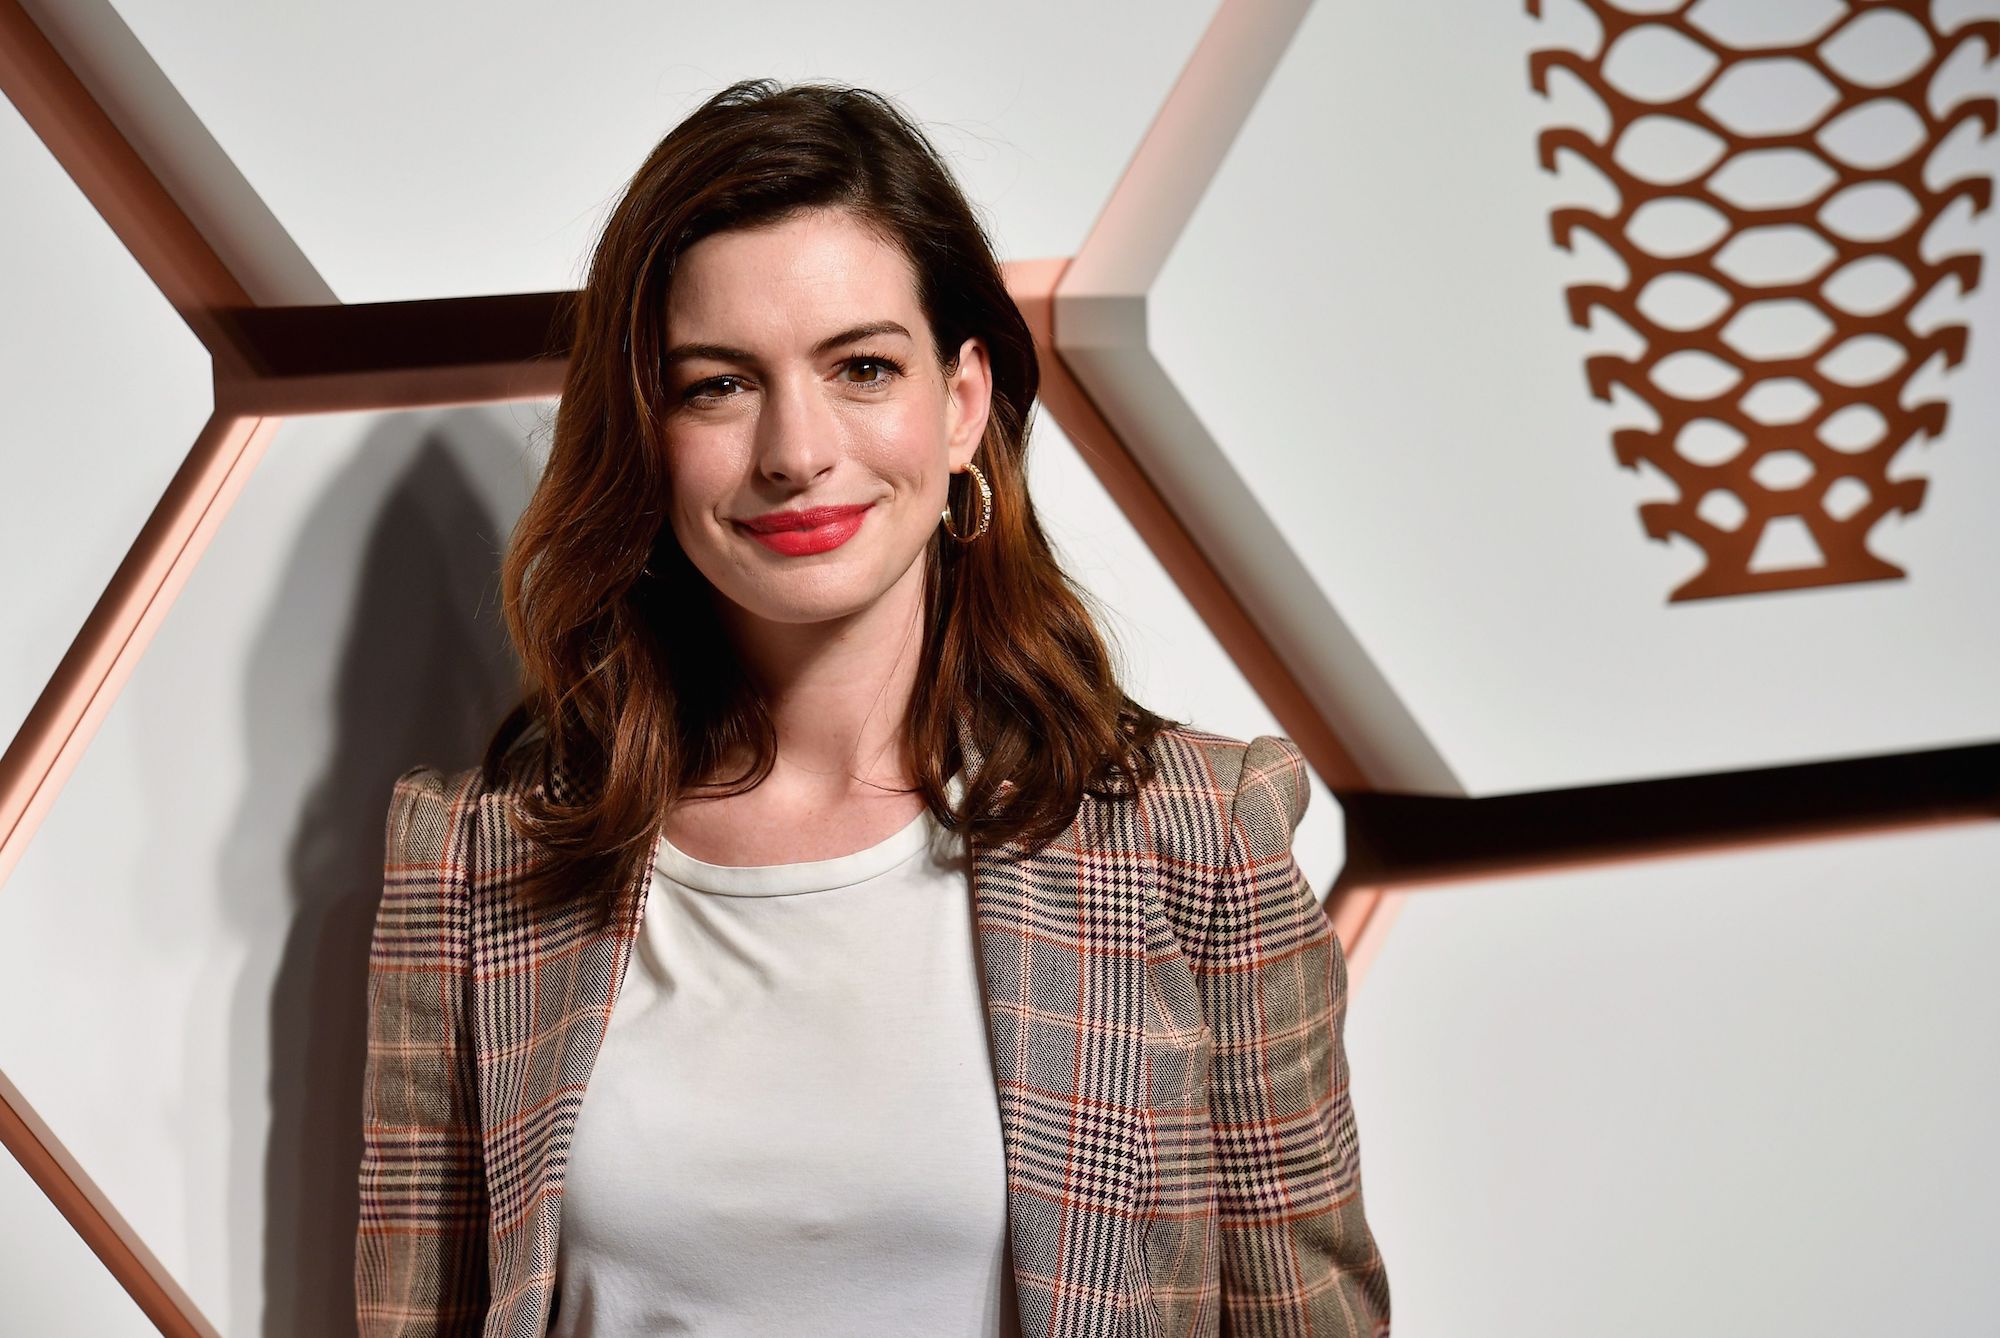 Anne Hathaway smiling in front of a geometric background